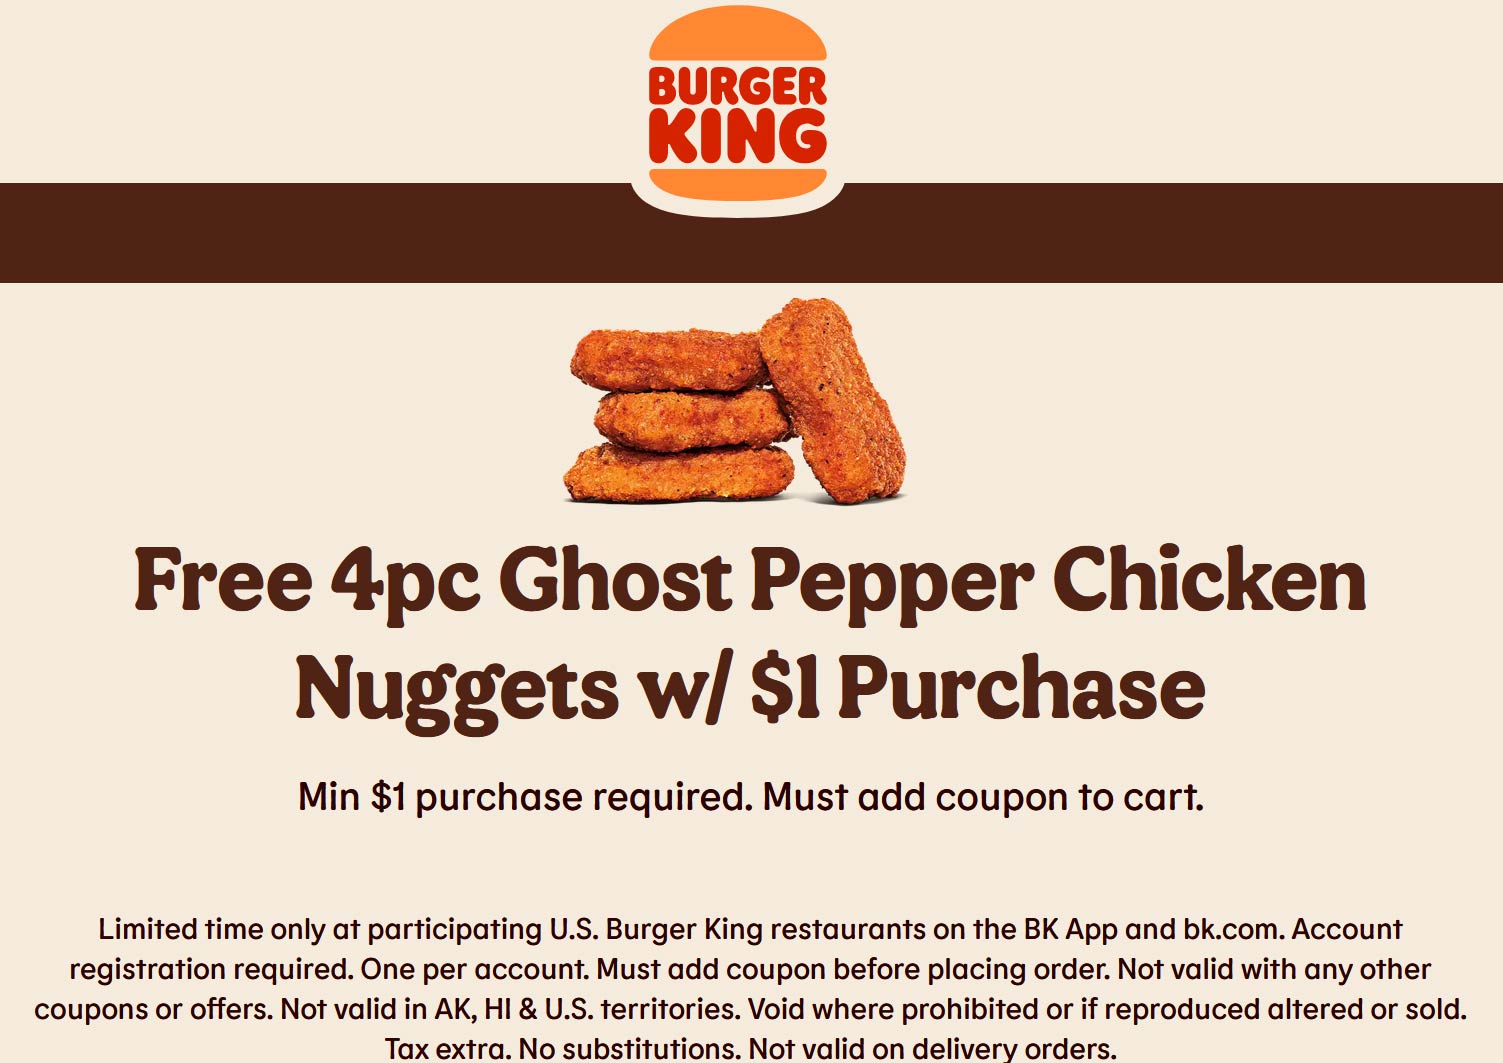 Burger King restaurants Coupon  Free ghost pepper chicken nuggets with $1+ online order at Burger King #burgerking 